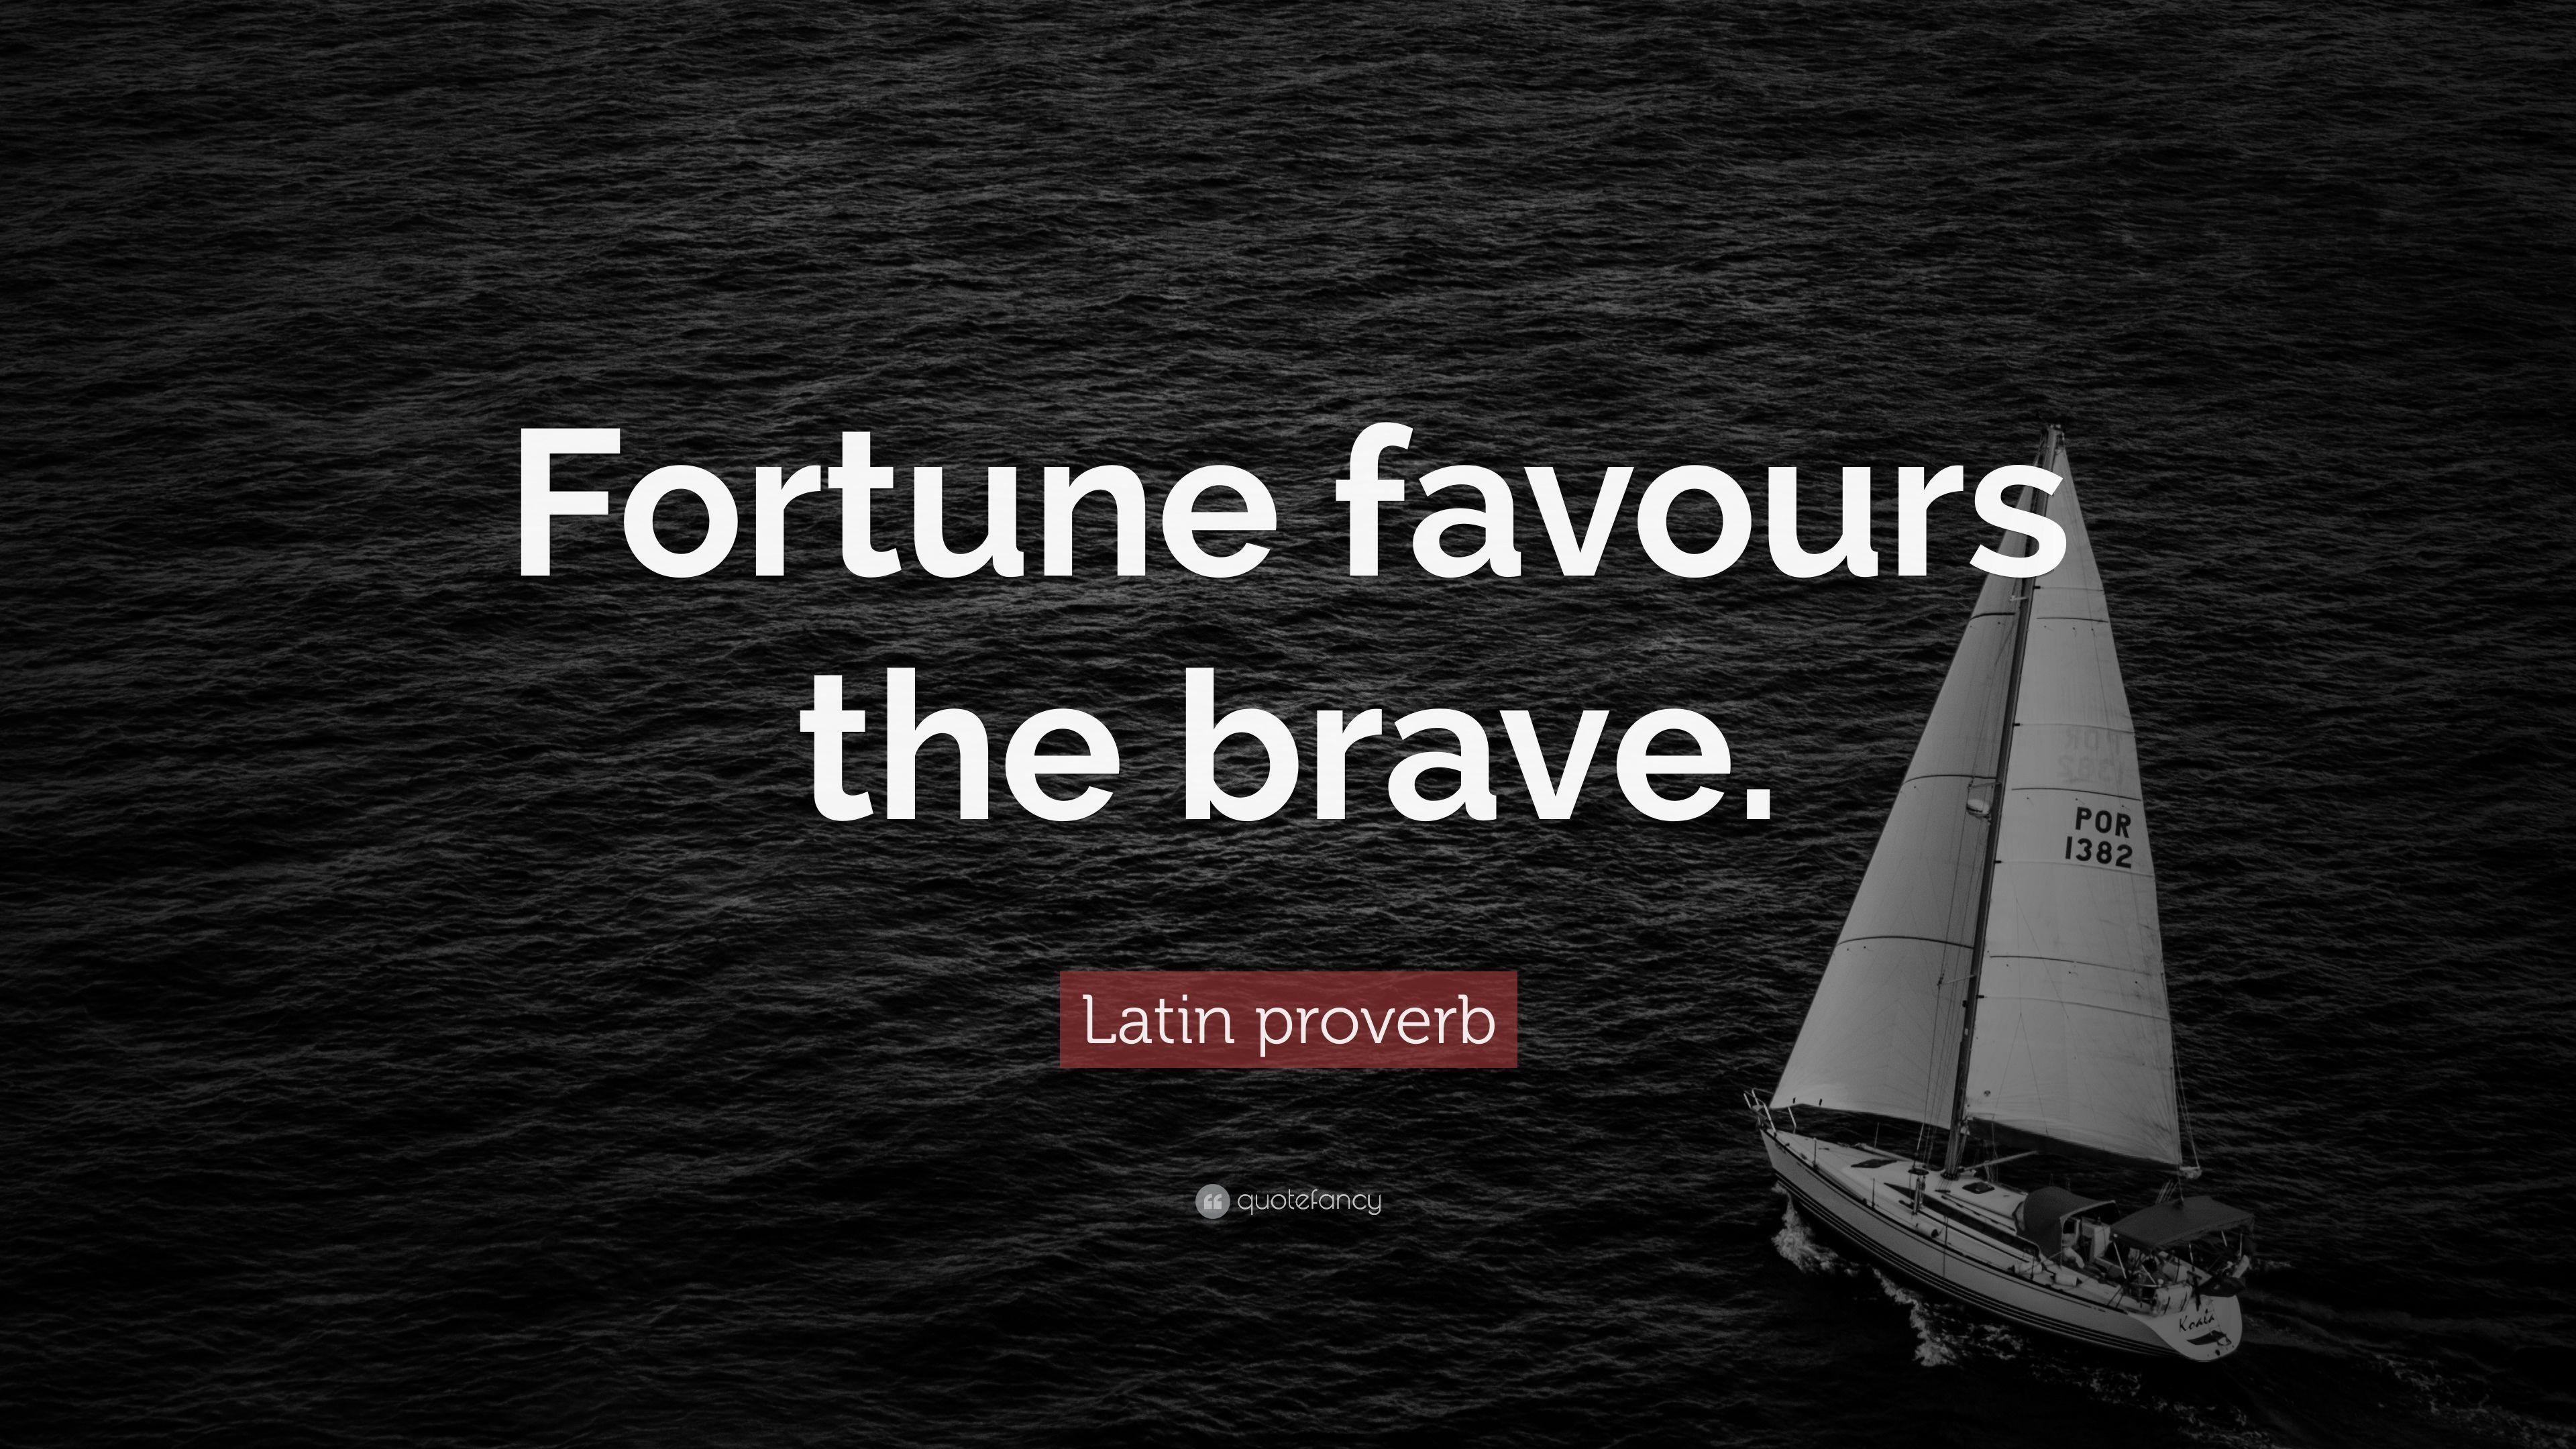 Latin proverb Quote: “Fortune favours the brave.” 10 wallpaper